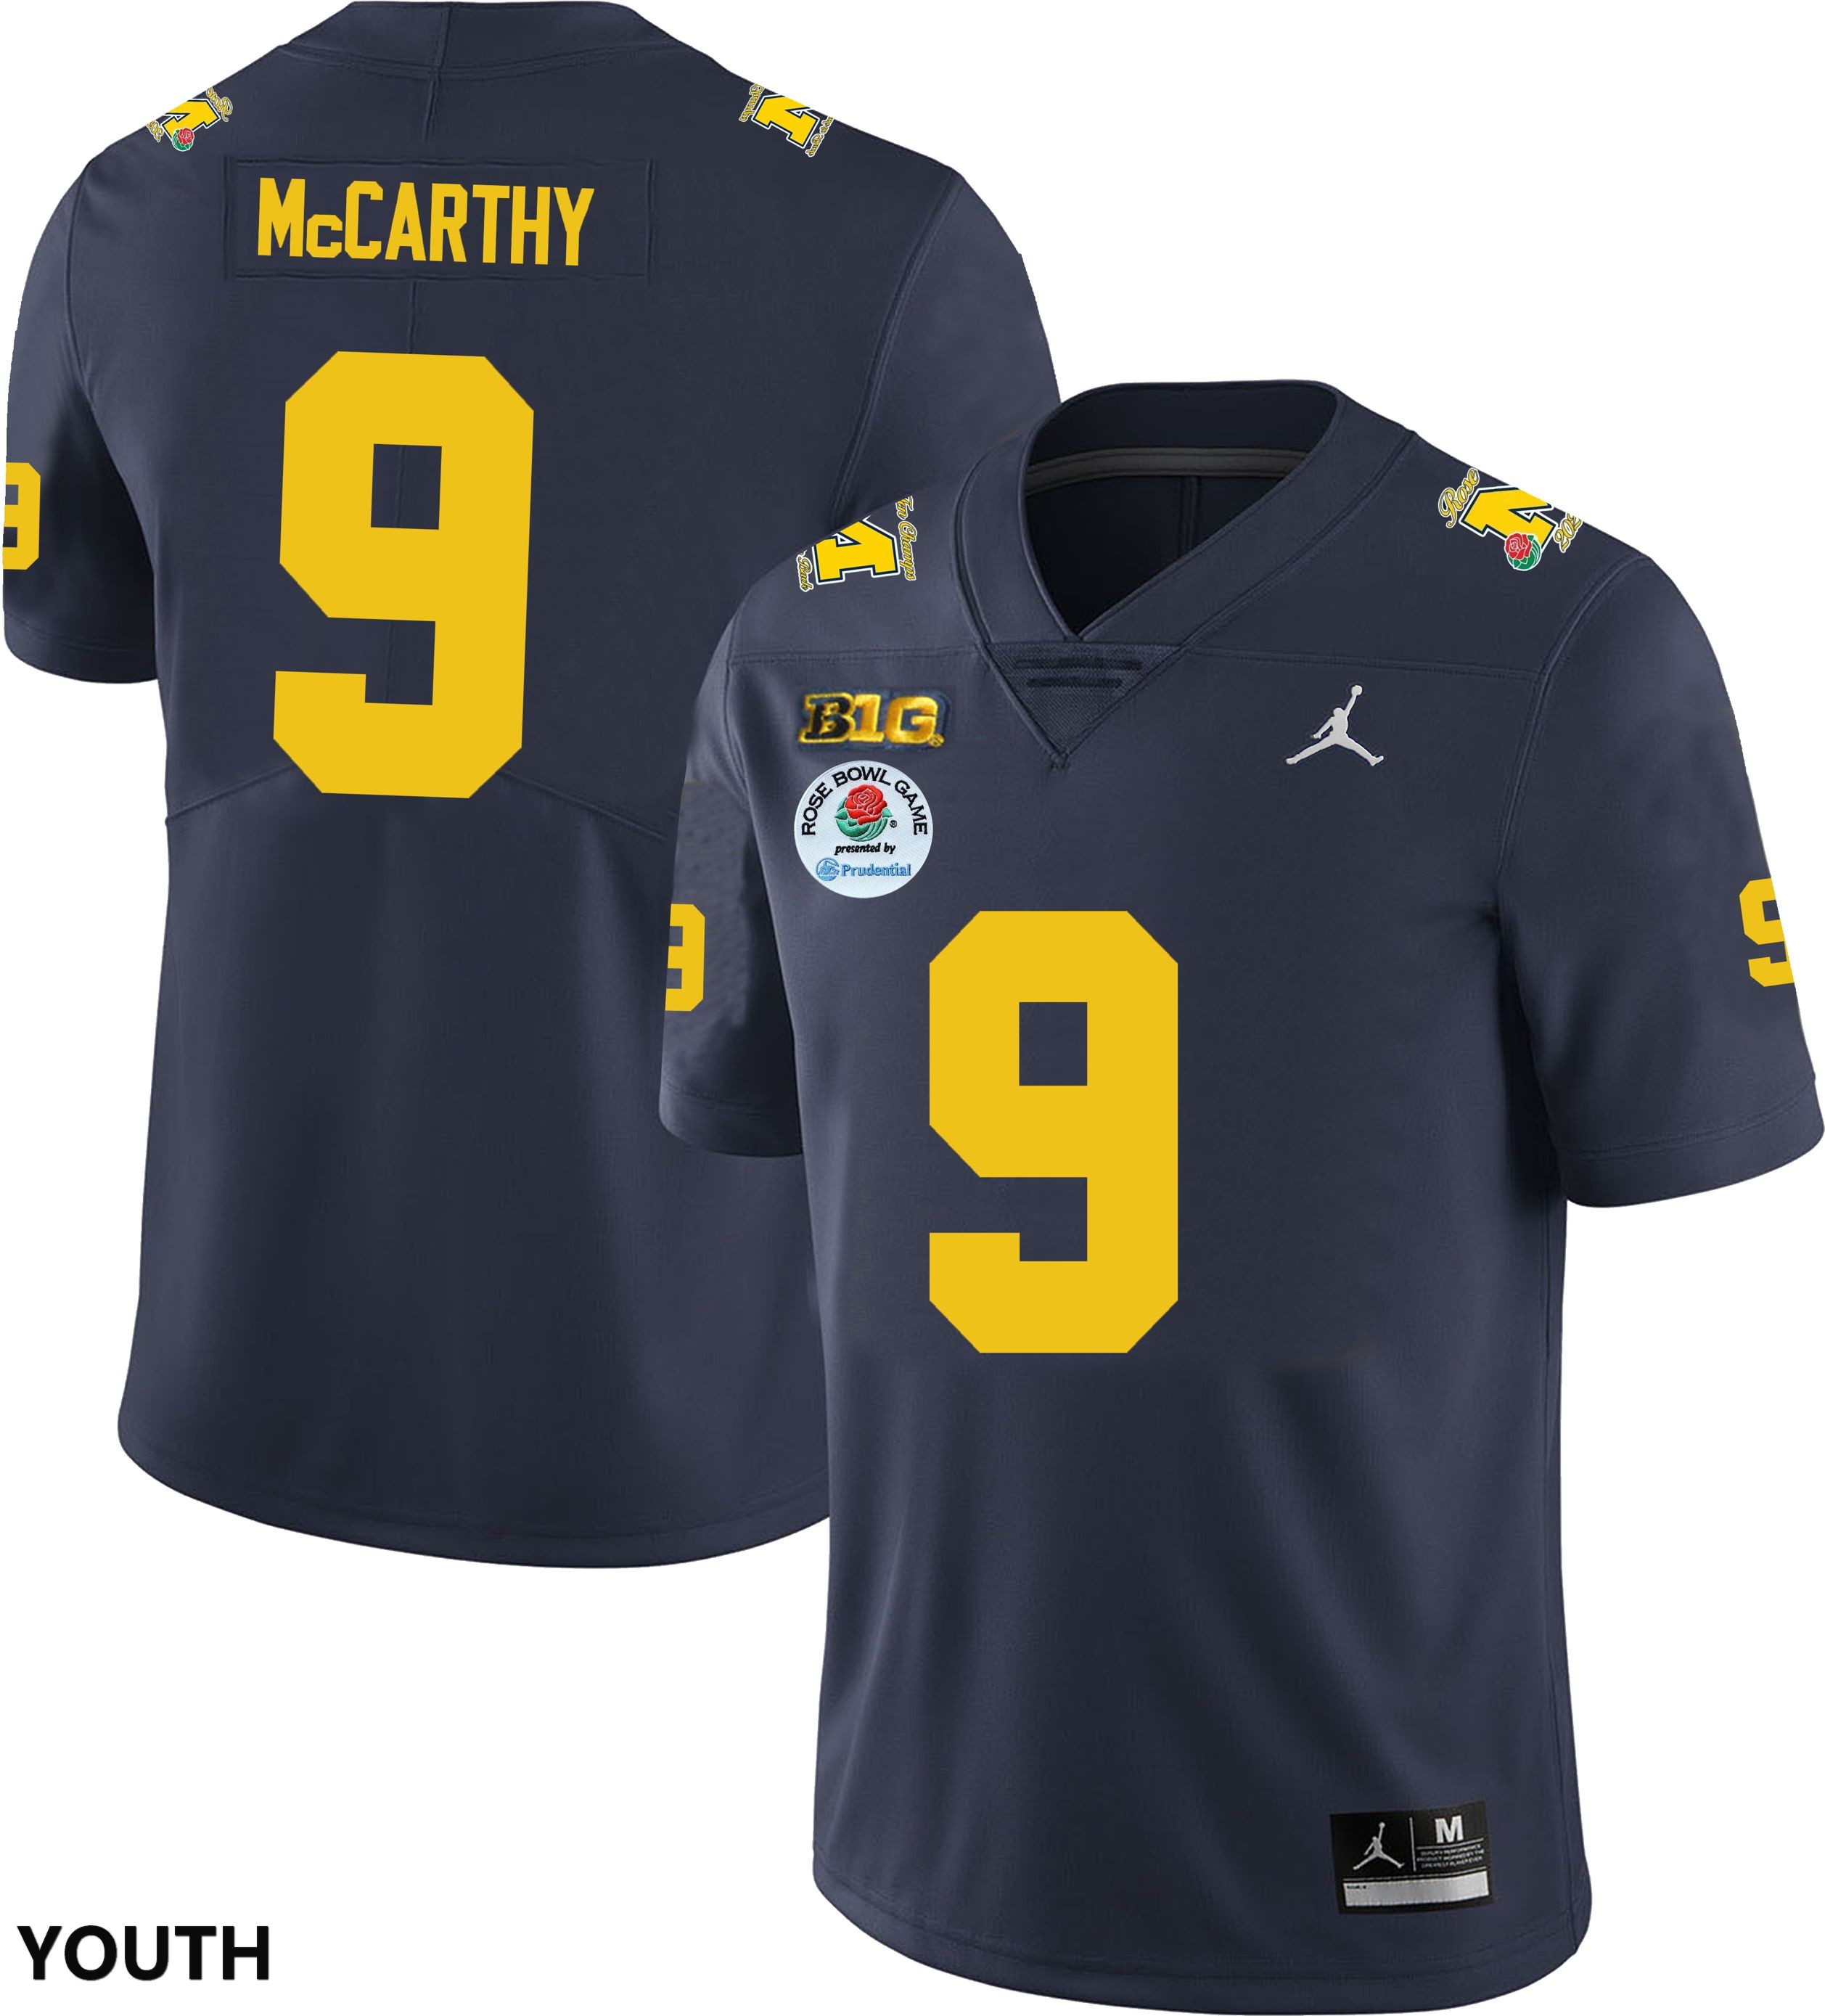 Youth NCAA Michigan Wolverines J.J. McCarthy #9 Navy Rose Bowl Game Stitched College Football Jersey HV255Q3TK